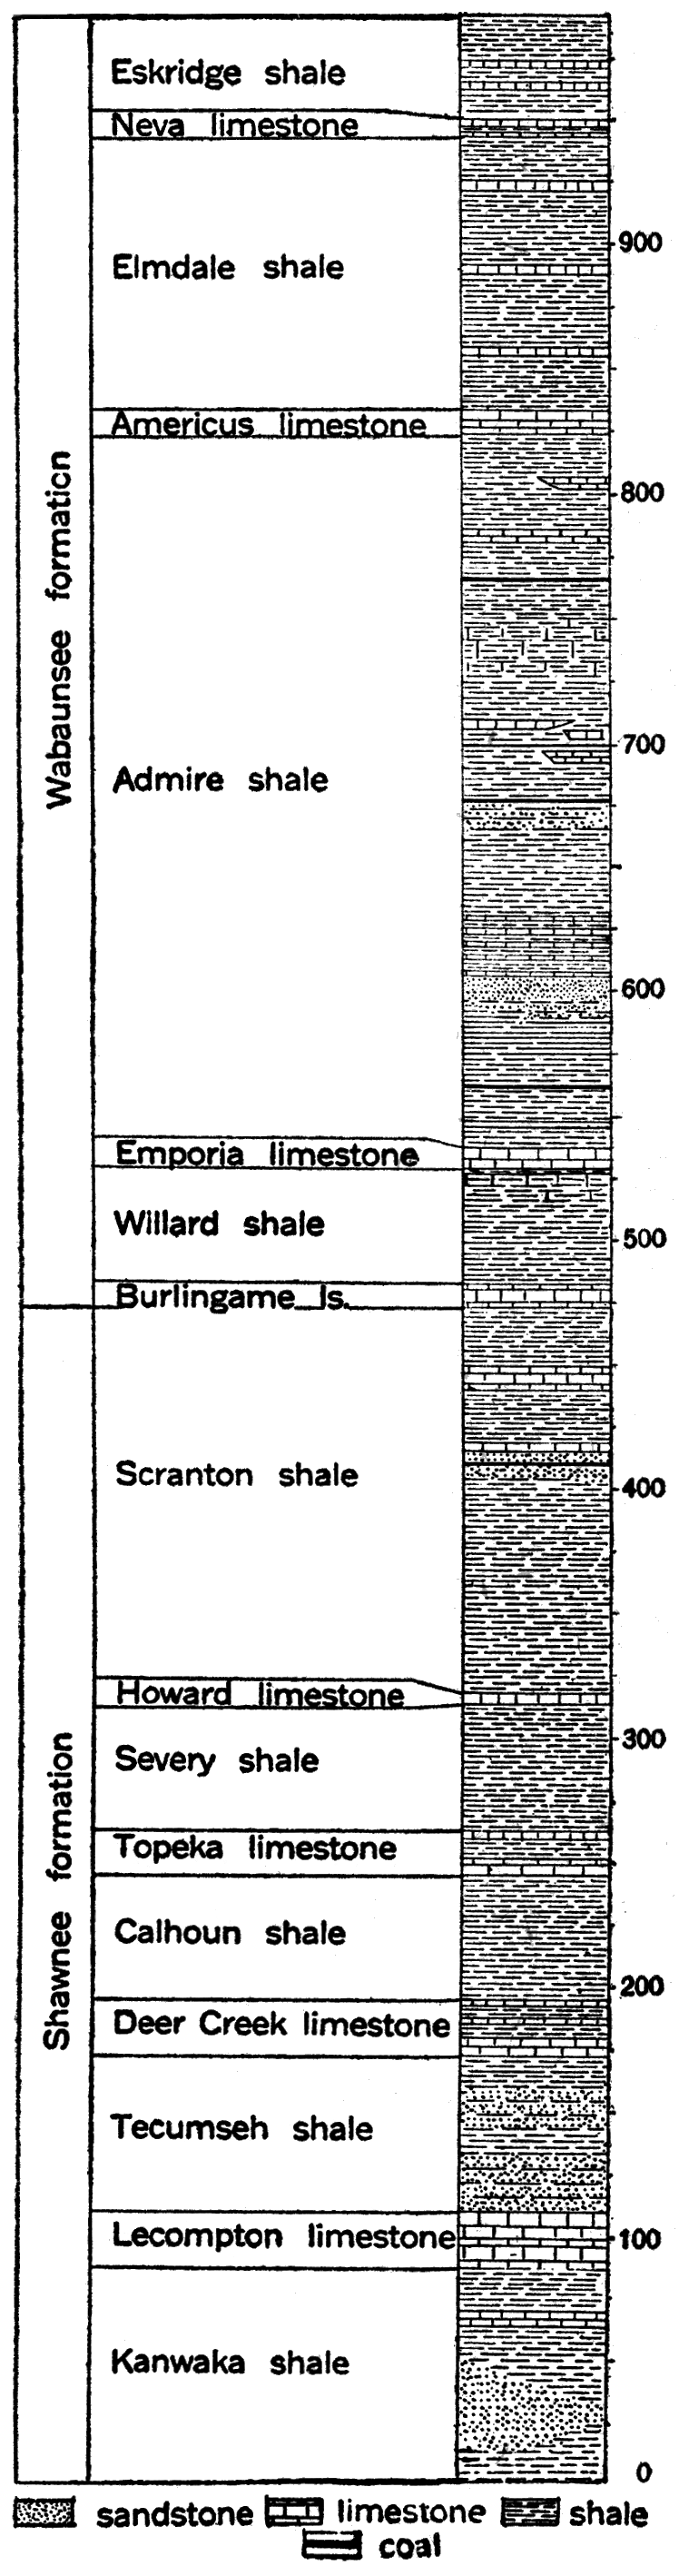 Generalized section of the Shawnee and Wabaunsee formations of the Missouri group of the Pennsylvanian in Kansas.